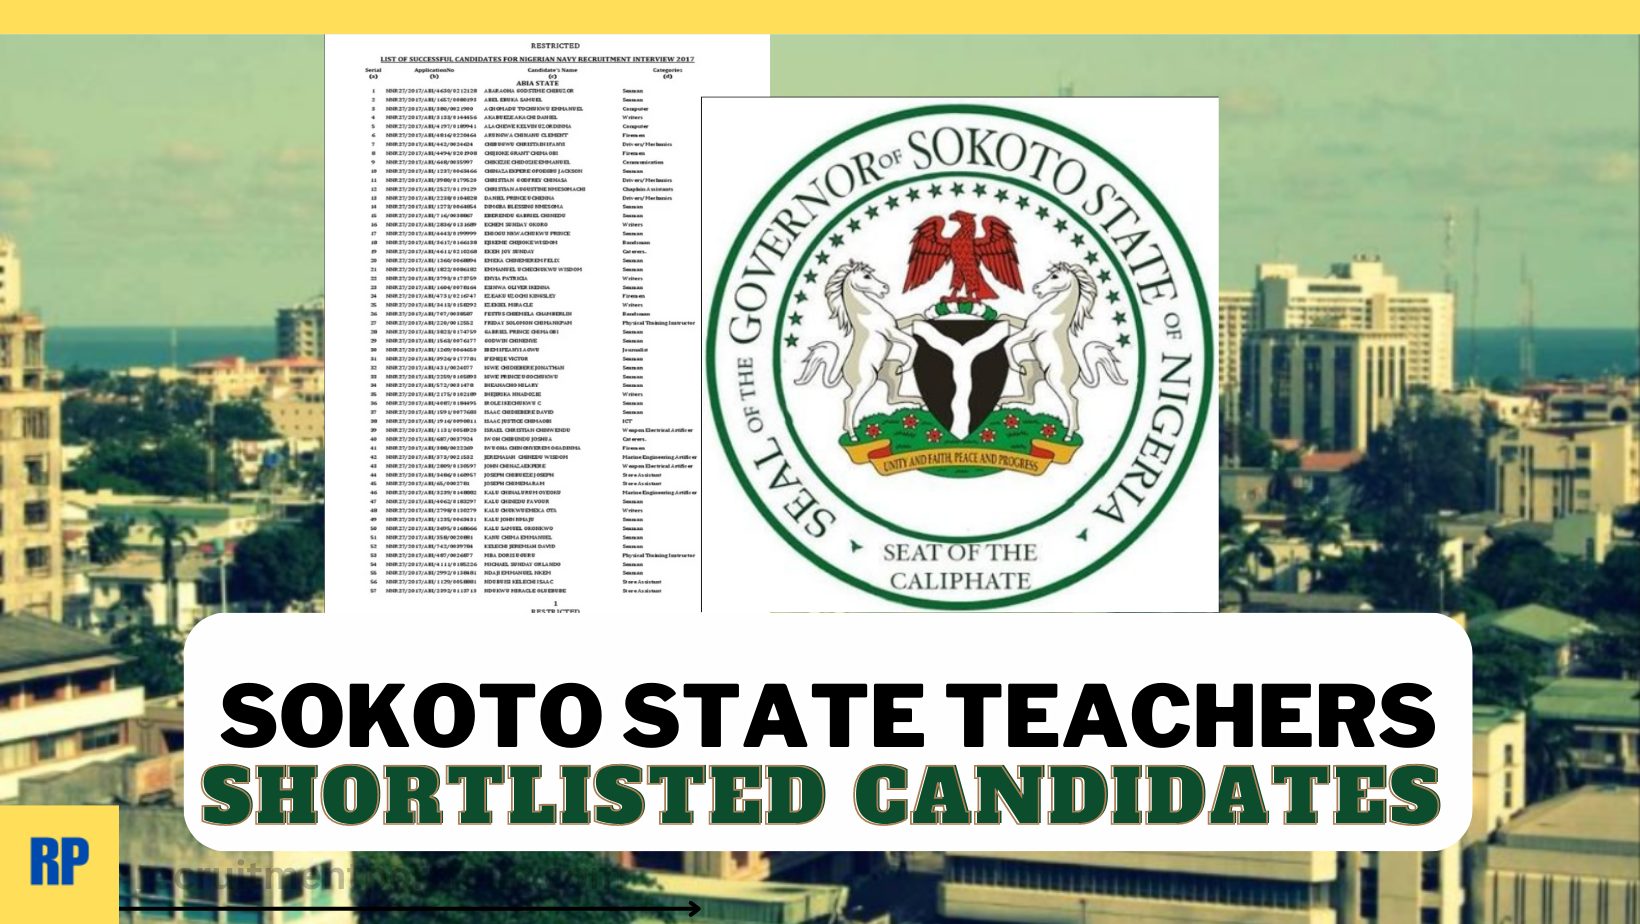 Sokoto State Teachers Shortlisted Candidates